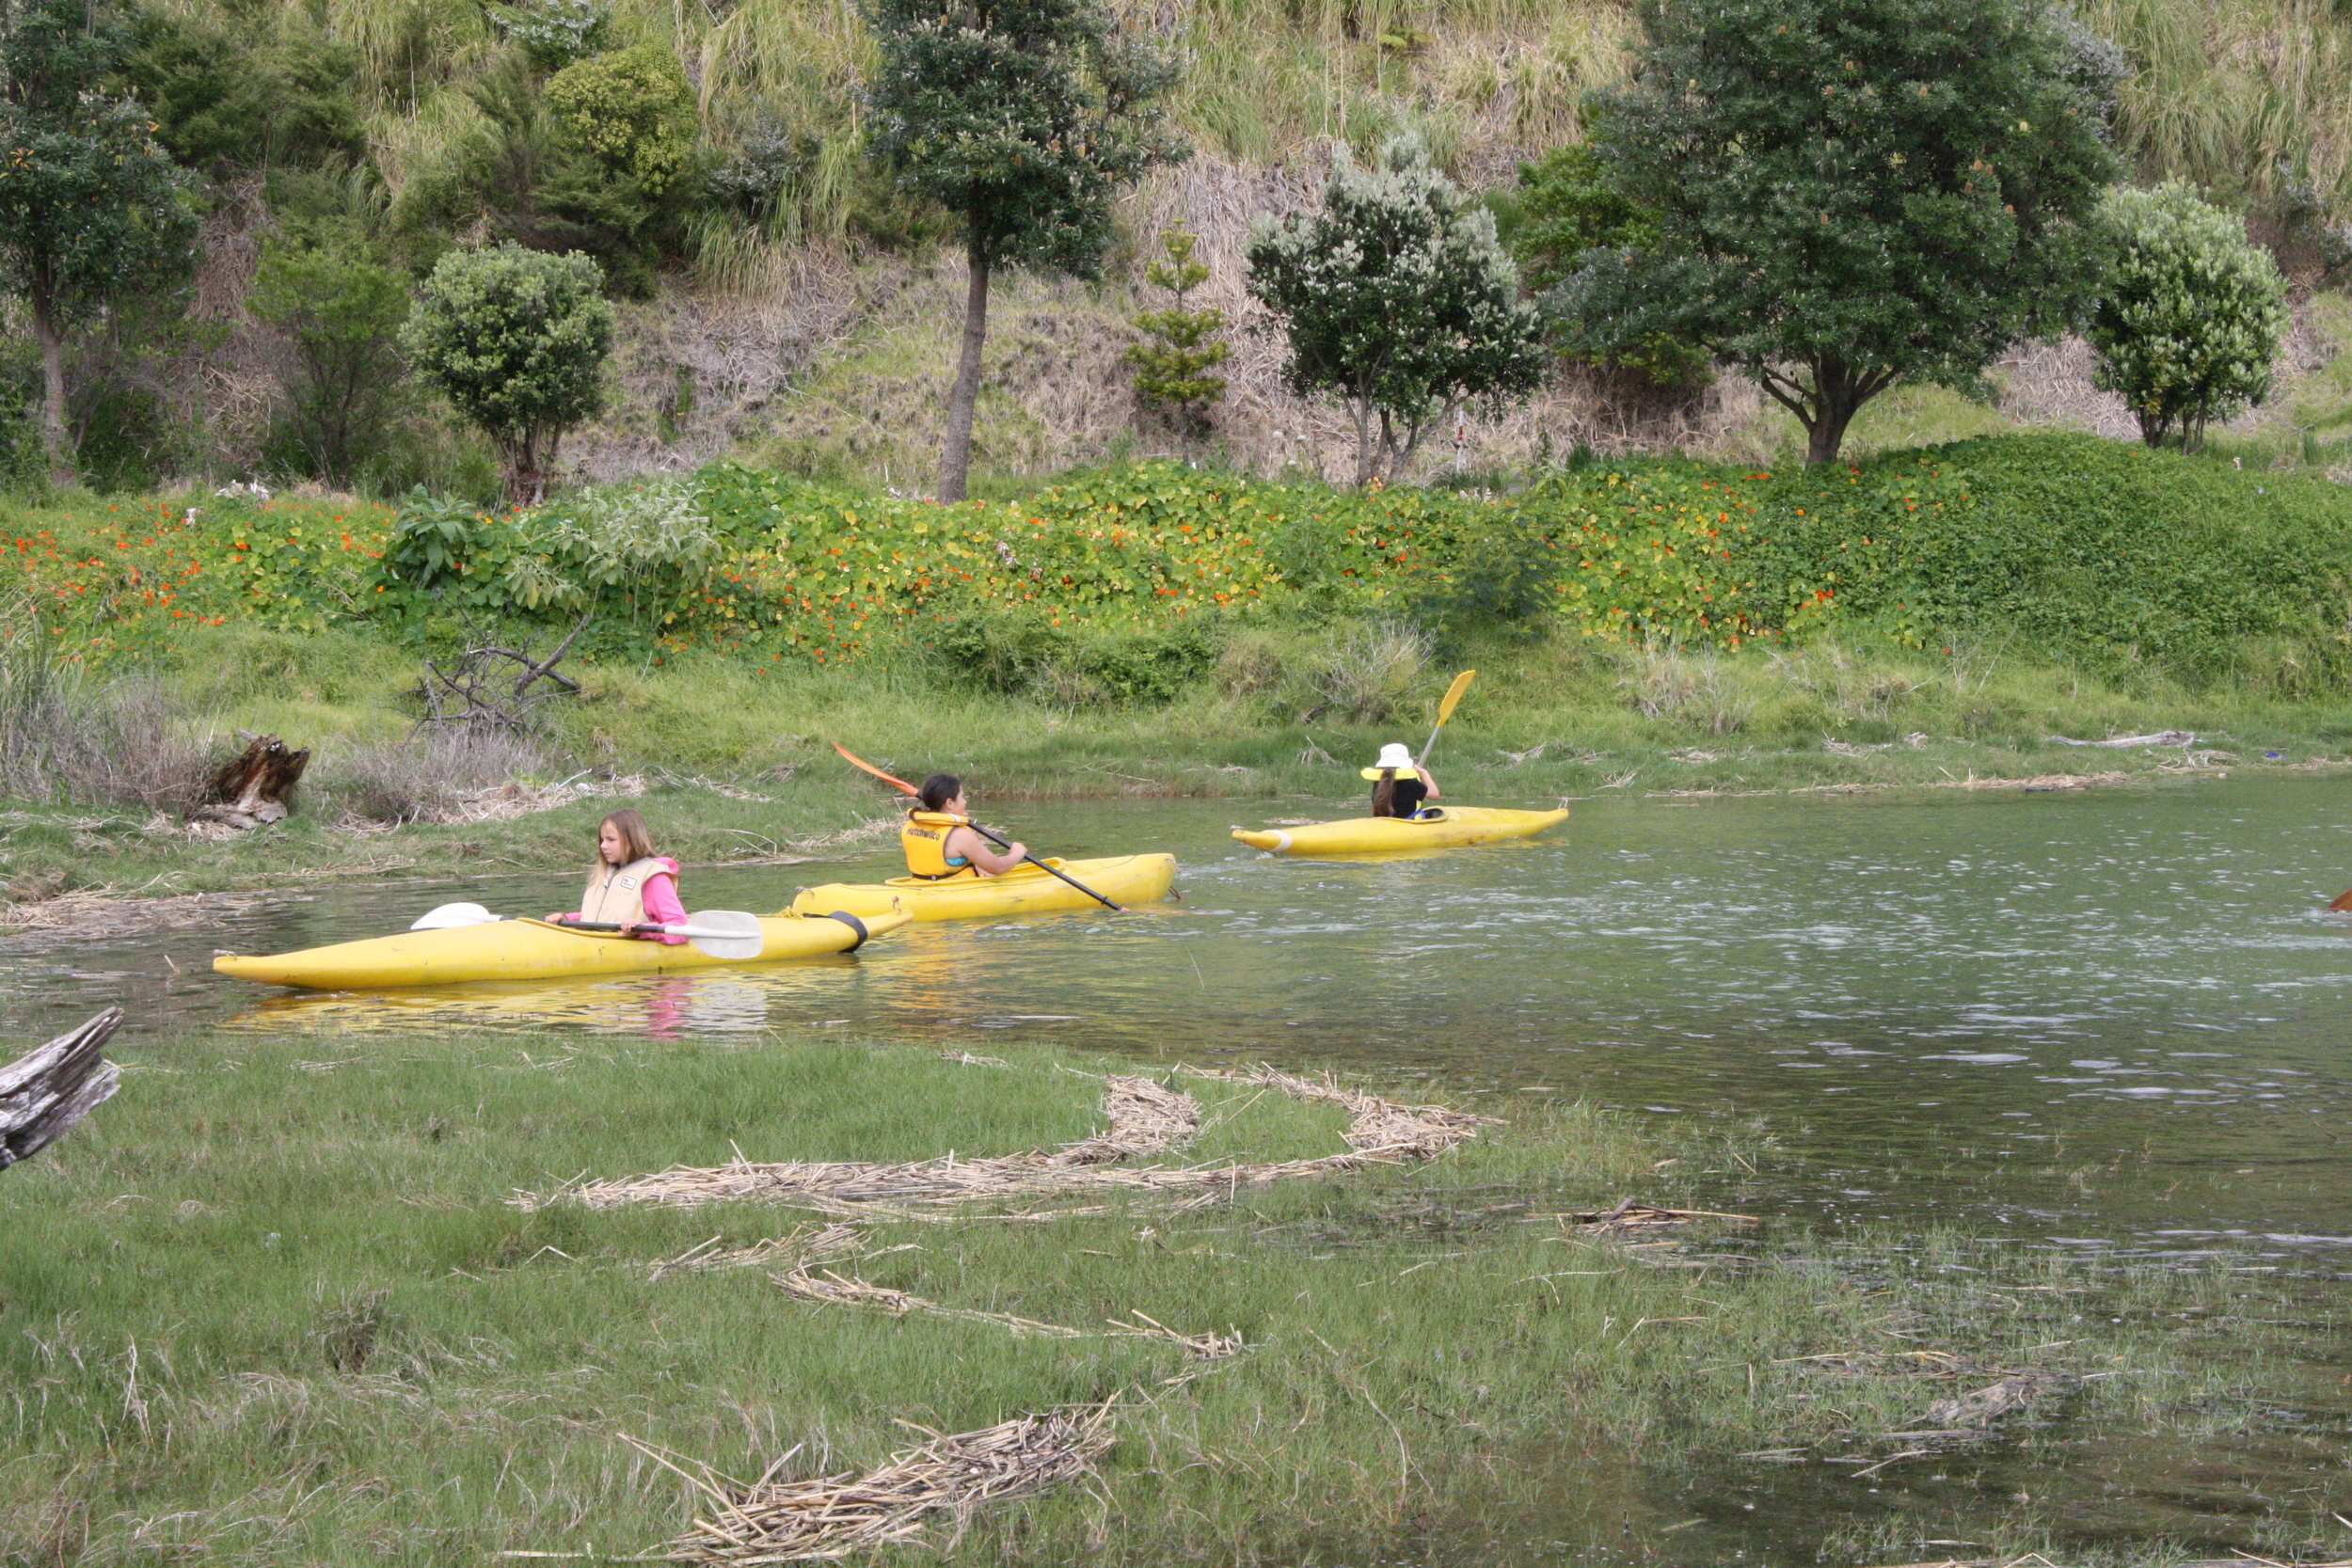   There are great bays to kayak, various providers are listed on our site.  